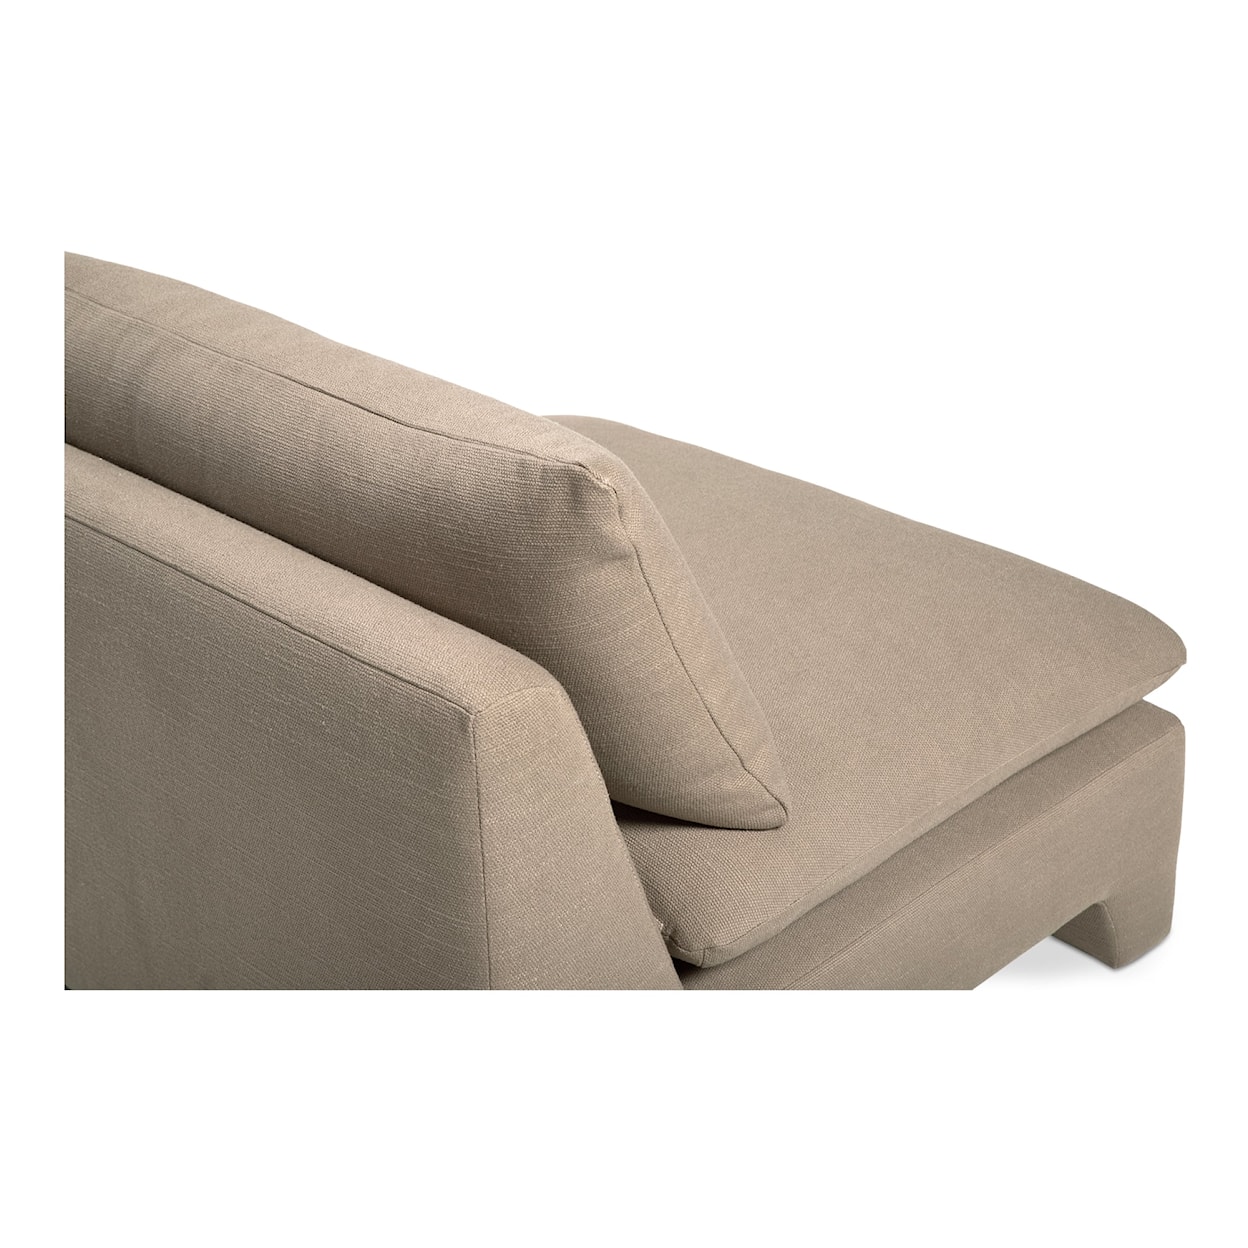 Moe's Home Collection Estelle Armless Lounge Chair